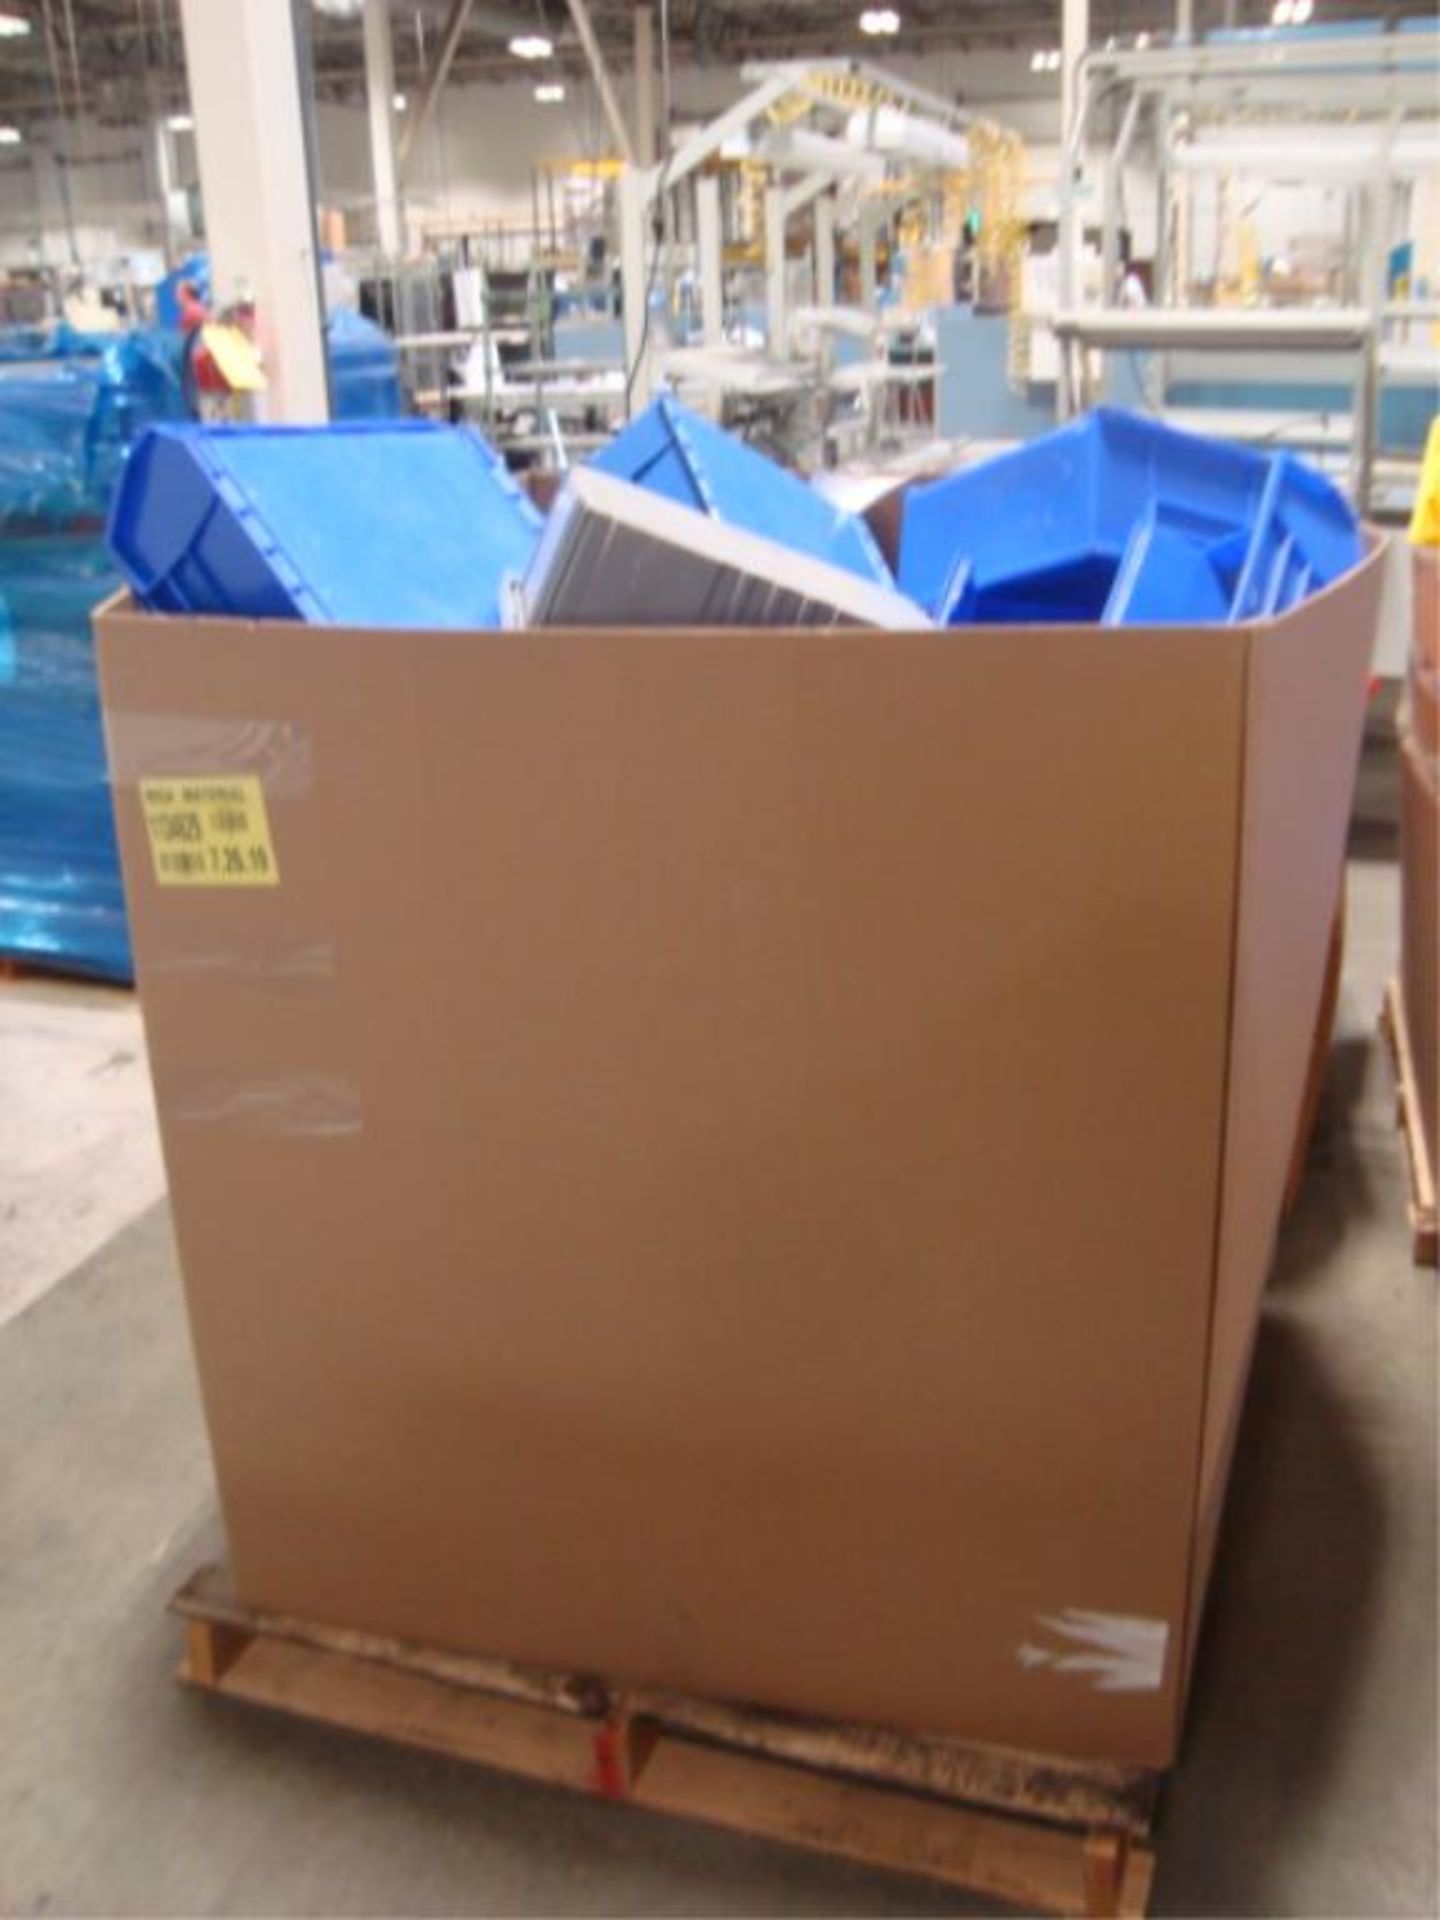 Parts Storage Totes - Image 6 of 8